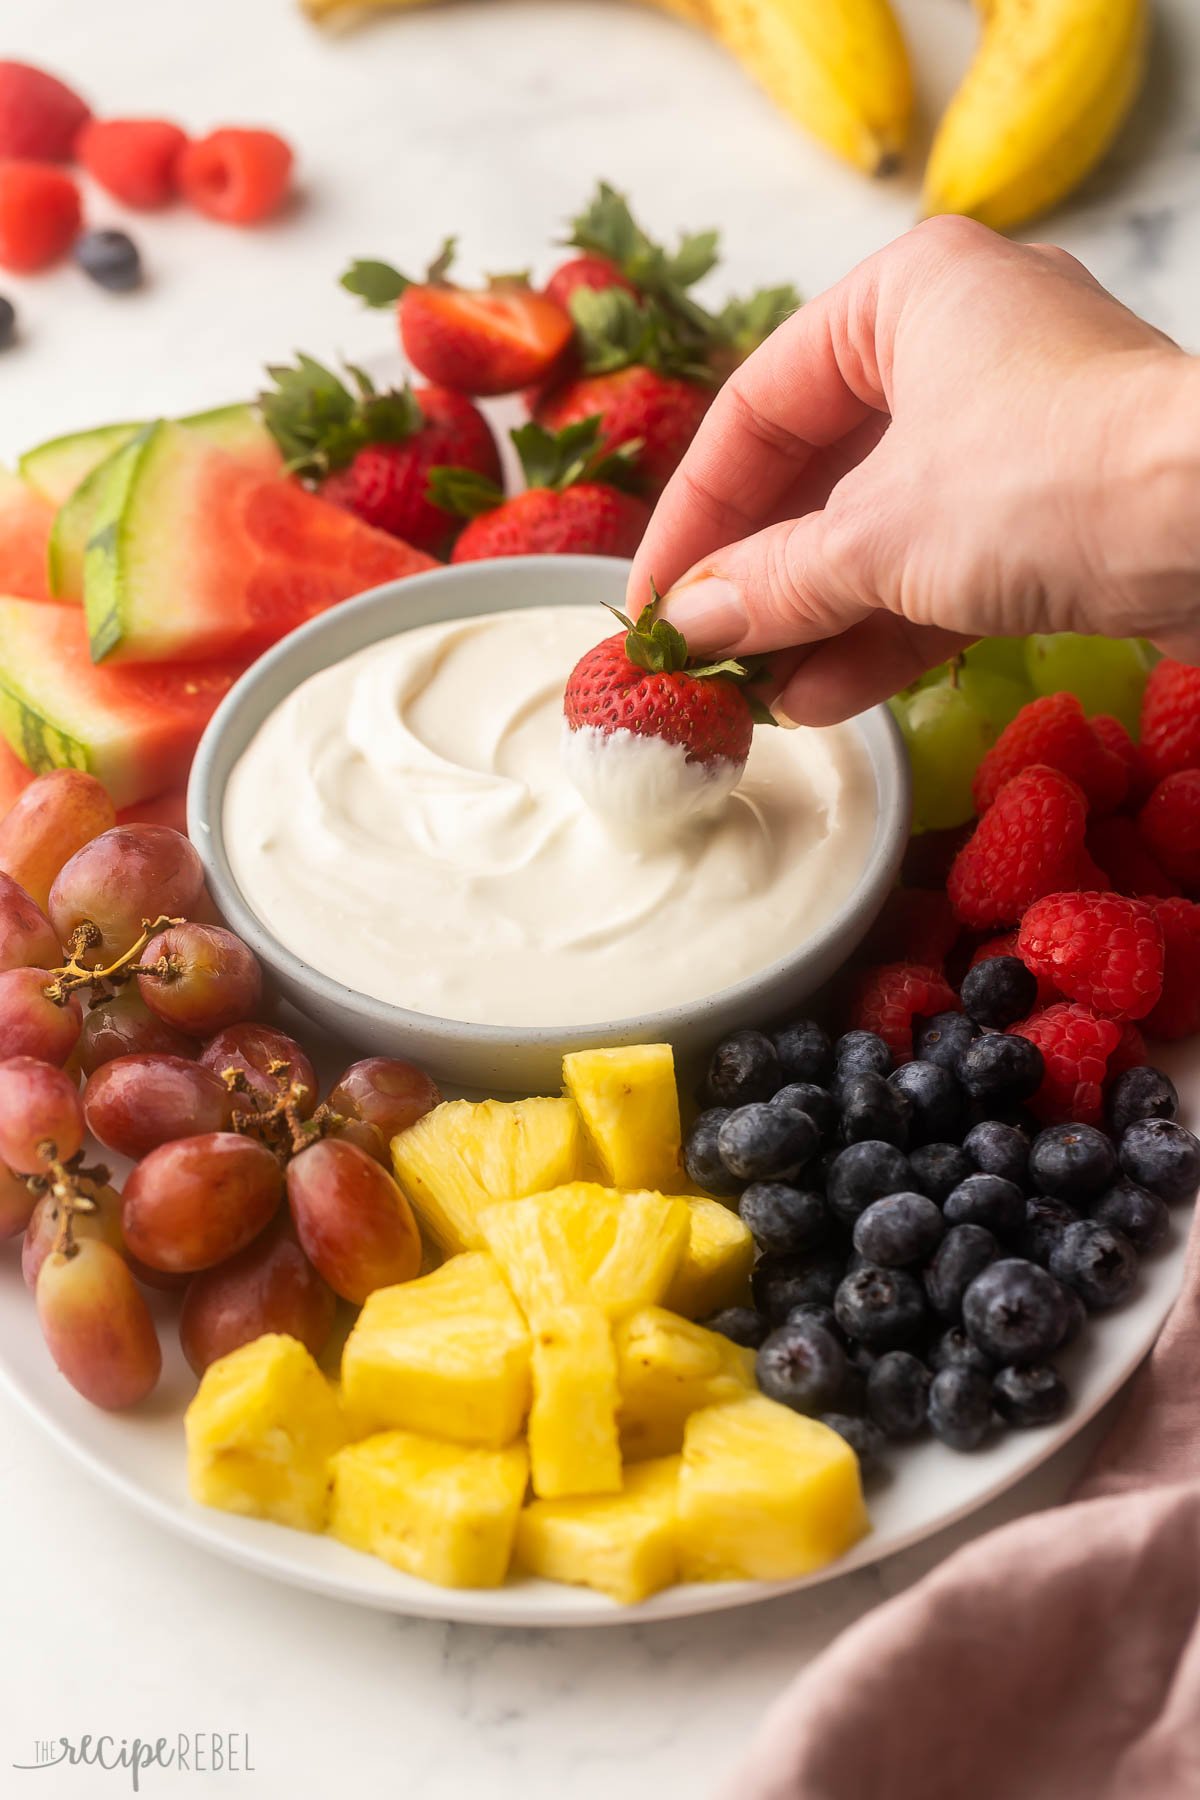 a strawberry being dipped in cream cheese fruit dip amongst a platter of fruit.